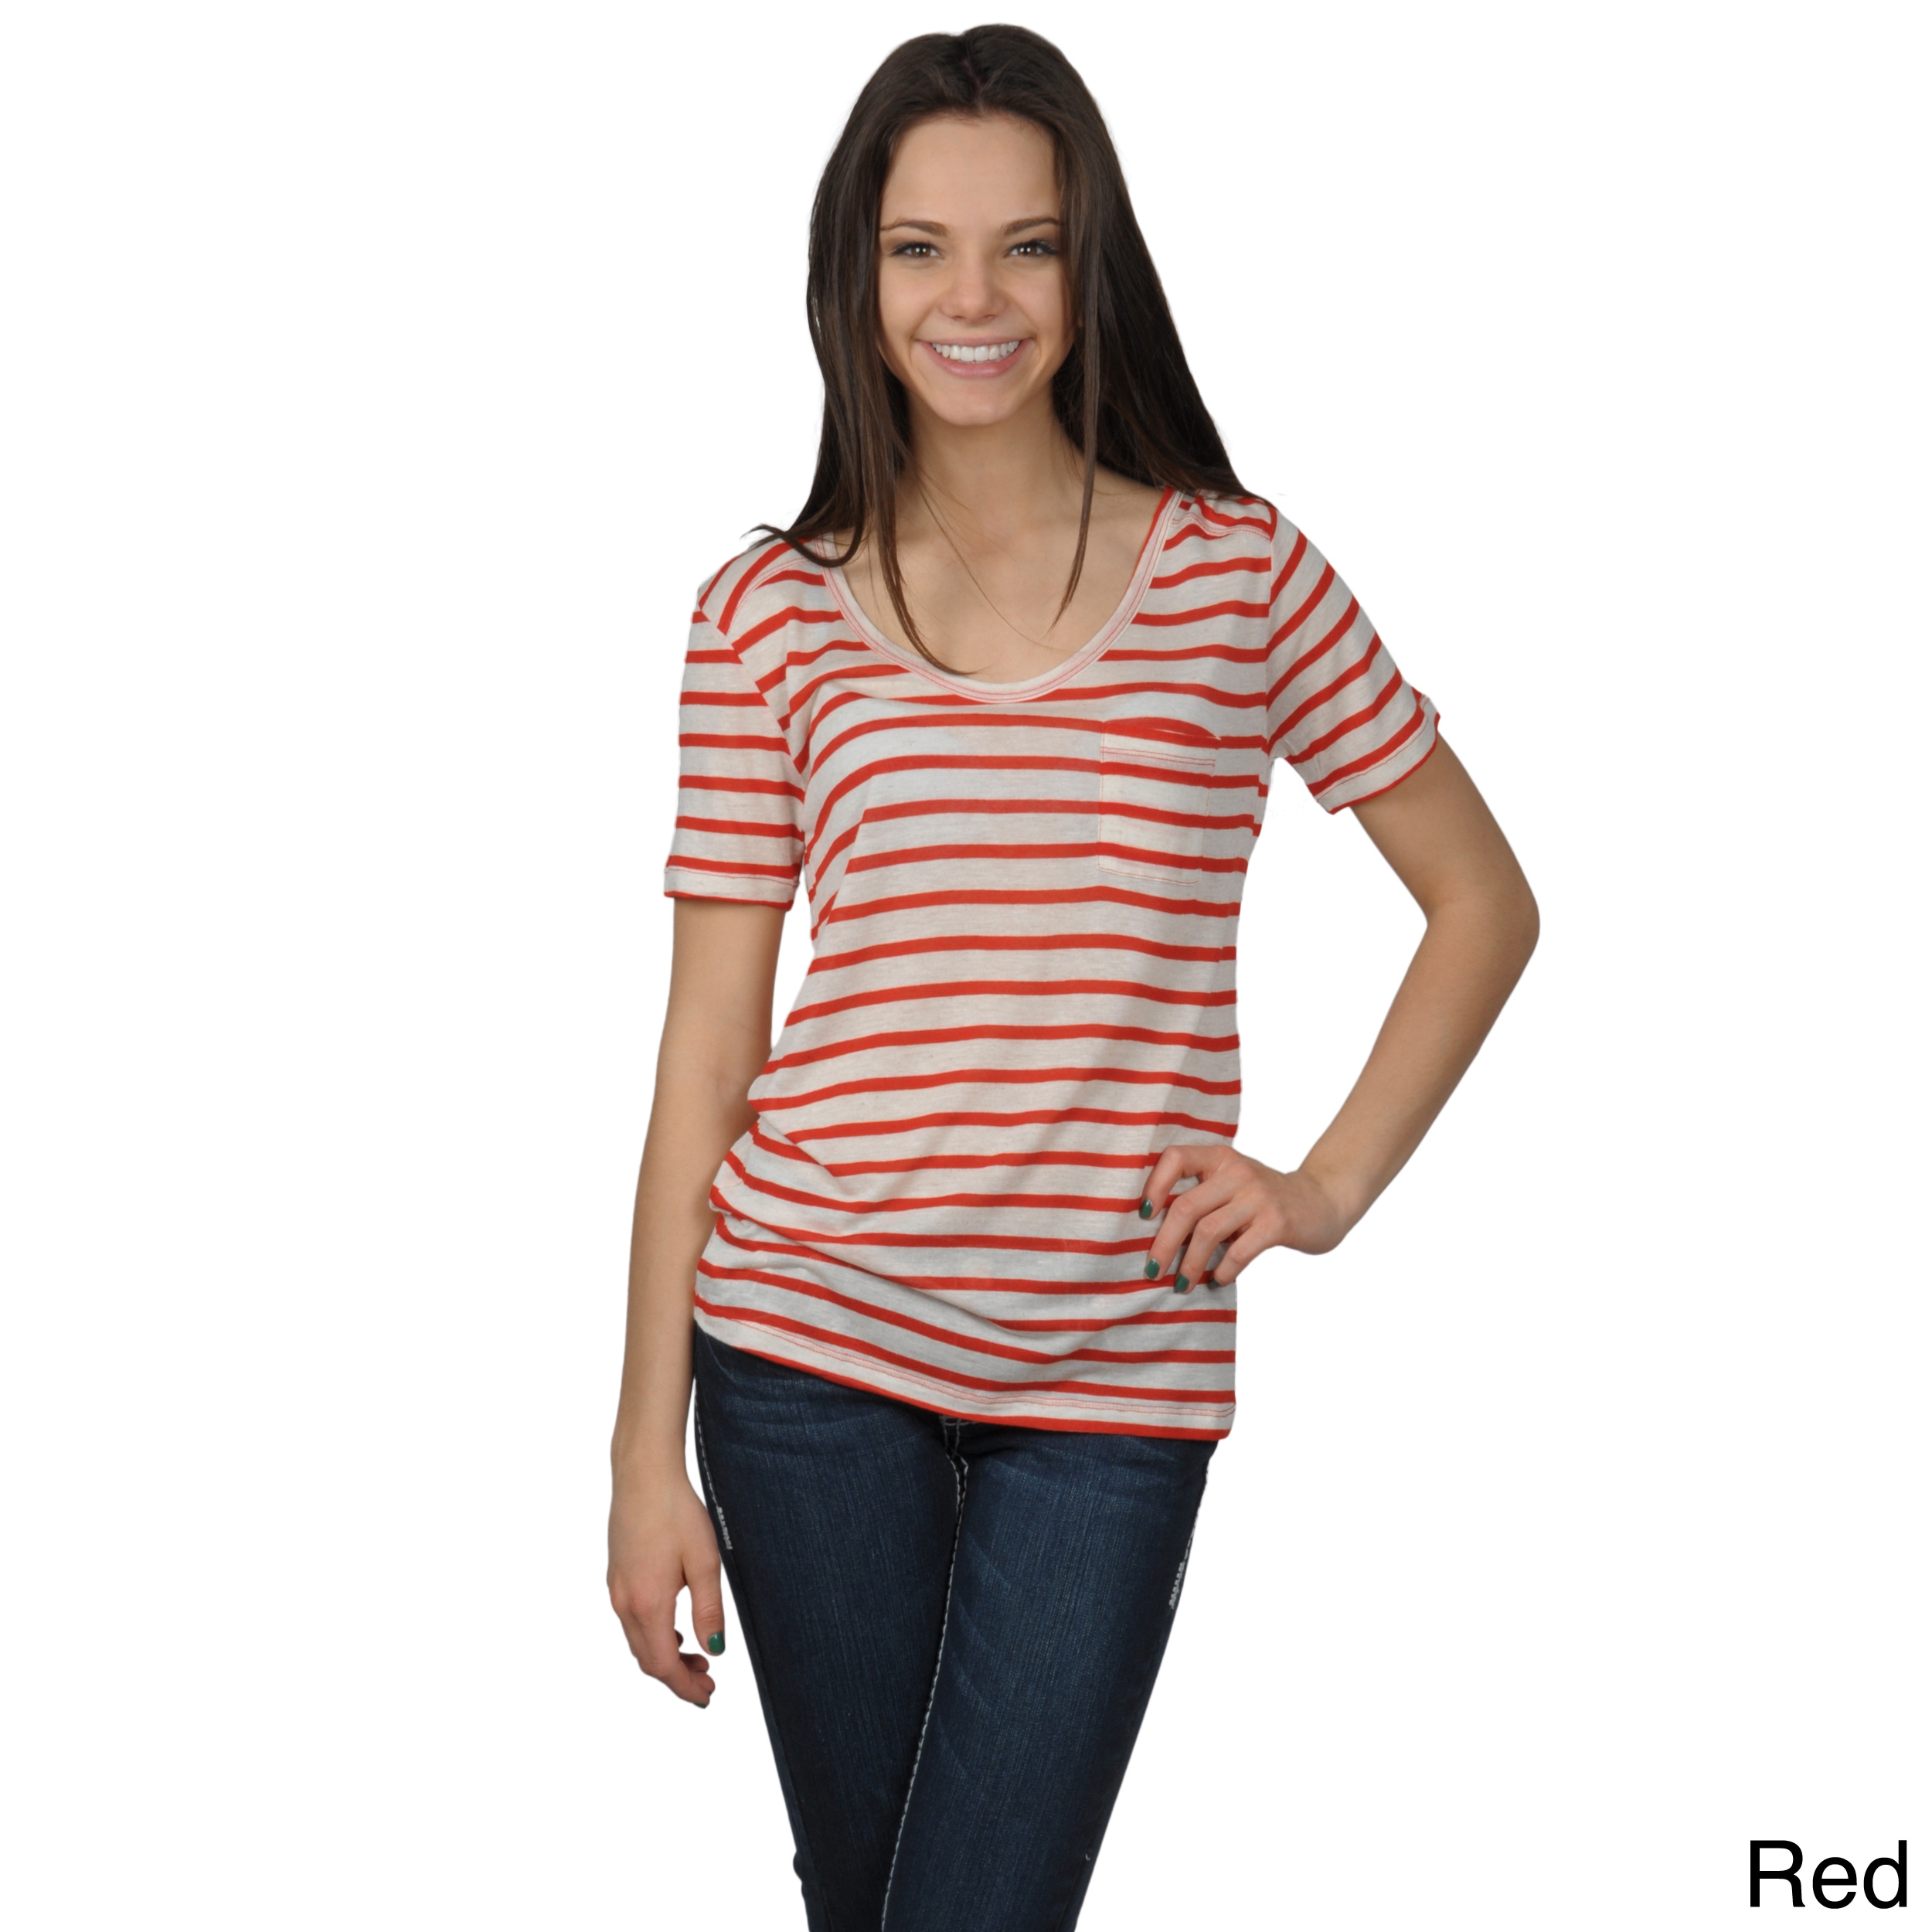 Journee Collection Journee Collection Juniors Striped Scoop Neck Tee Red Size S (1  3)